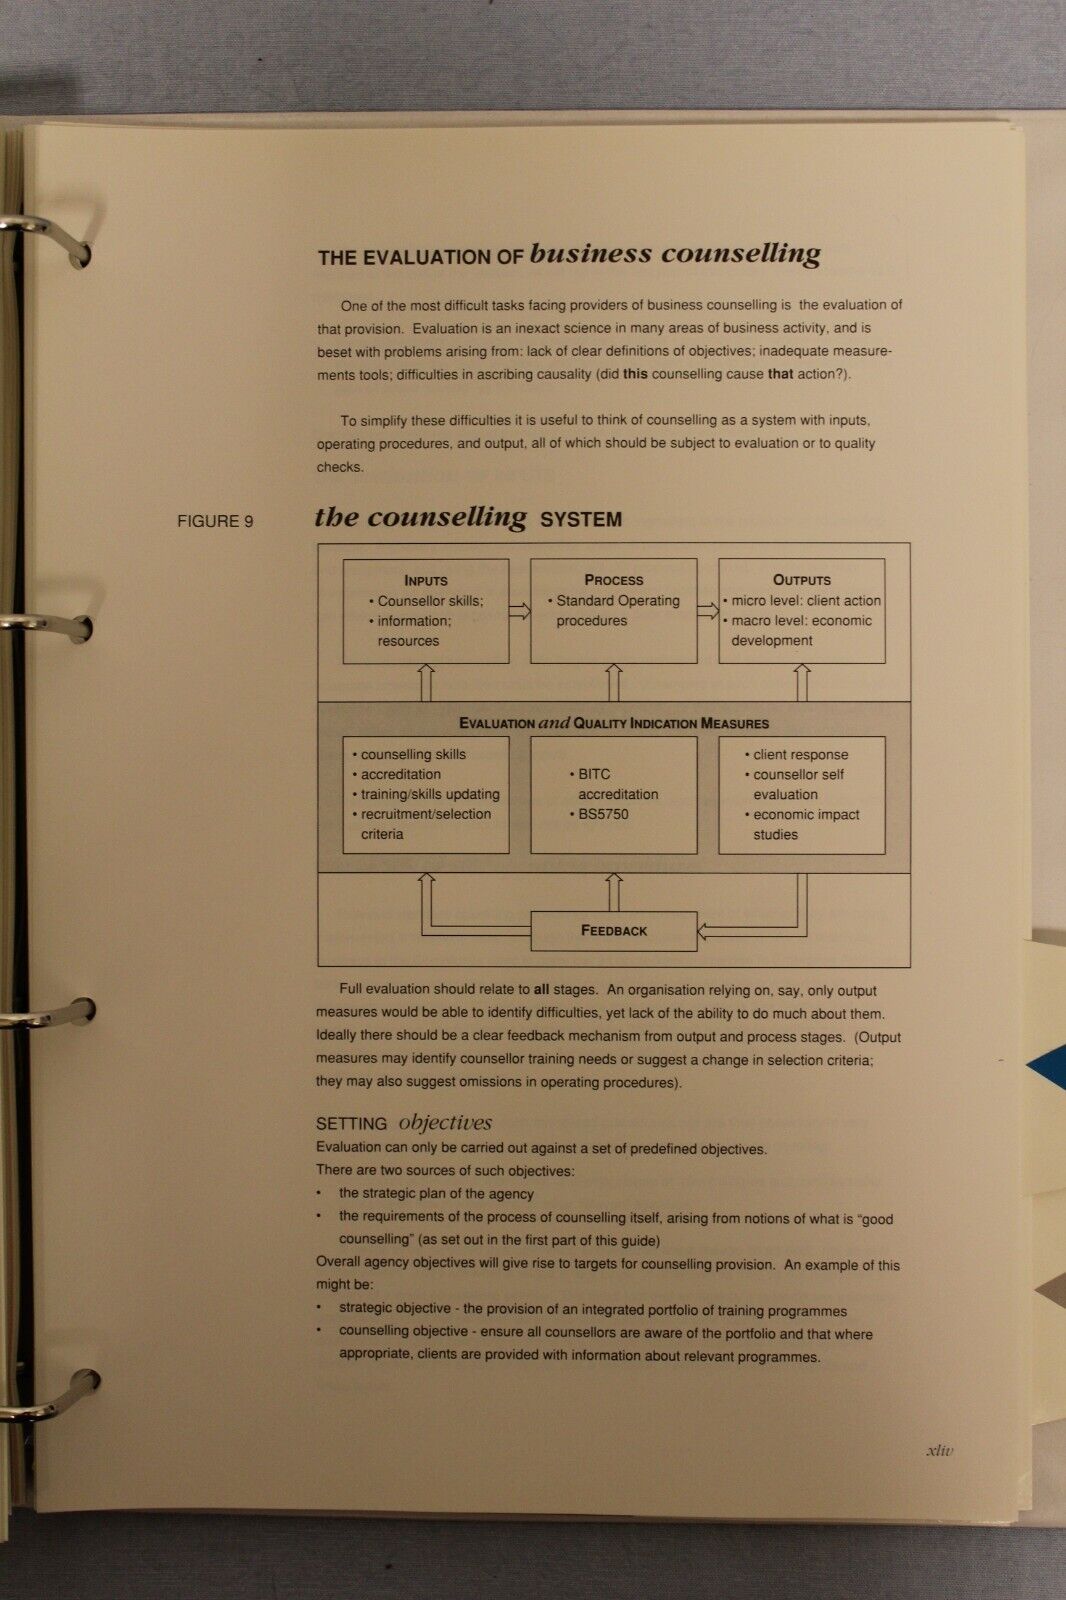 11332.Guide to Business Counselling. Managing & Monitoring. Training Materials